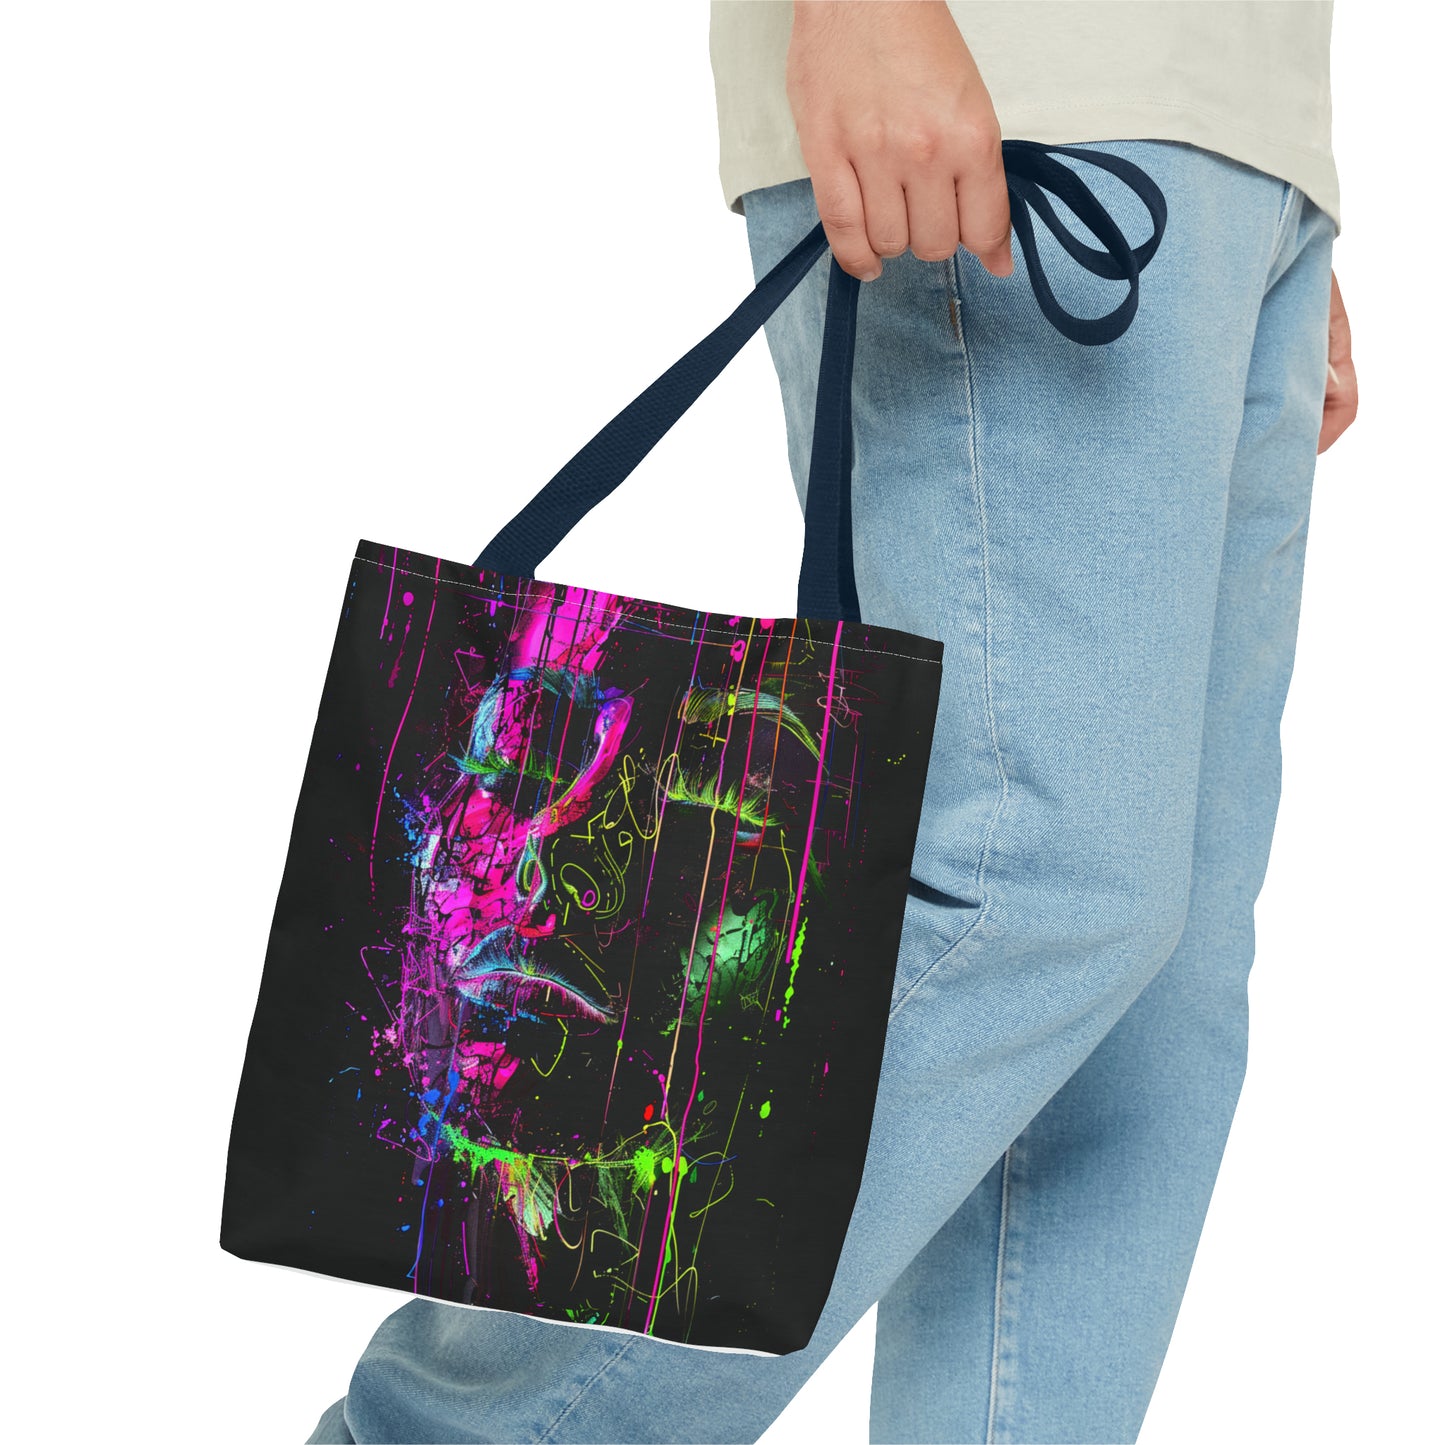 The Muse| Thoughts| Color-Dripping Ink |Portrait of a Woman| Tote Bag